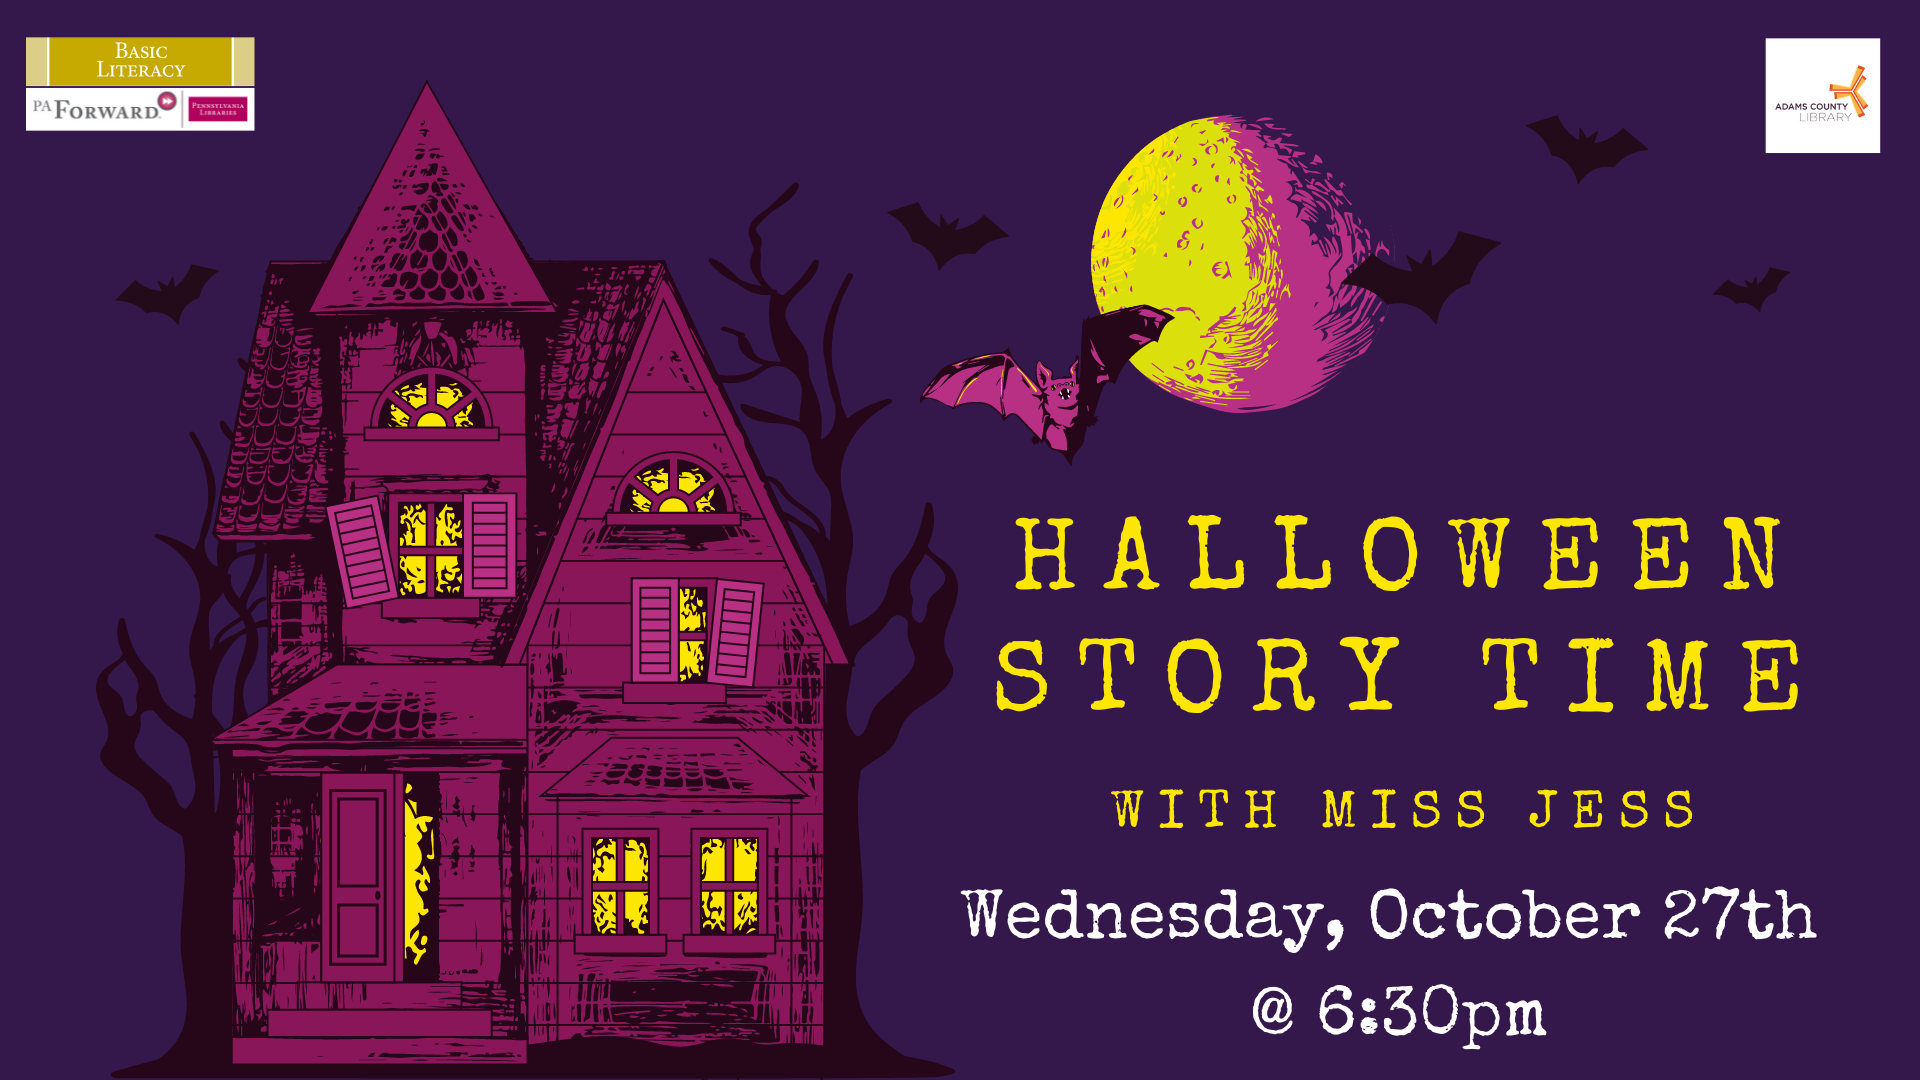 Join us for Halloween Story Time with Miss Jess on Wednesday, October 27, 2021 at 6:30pm.